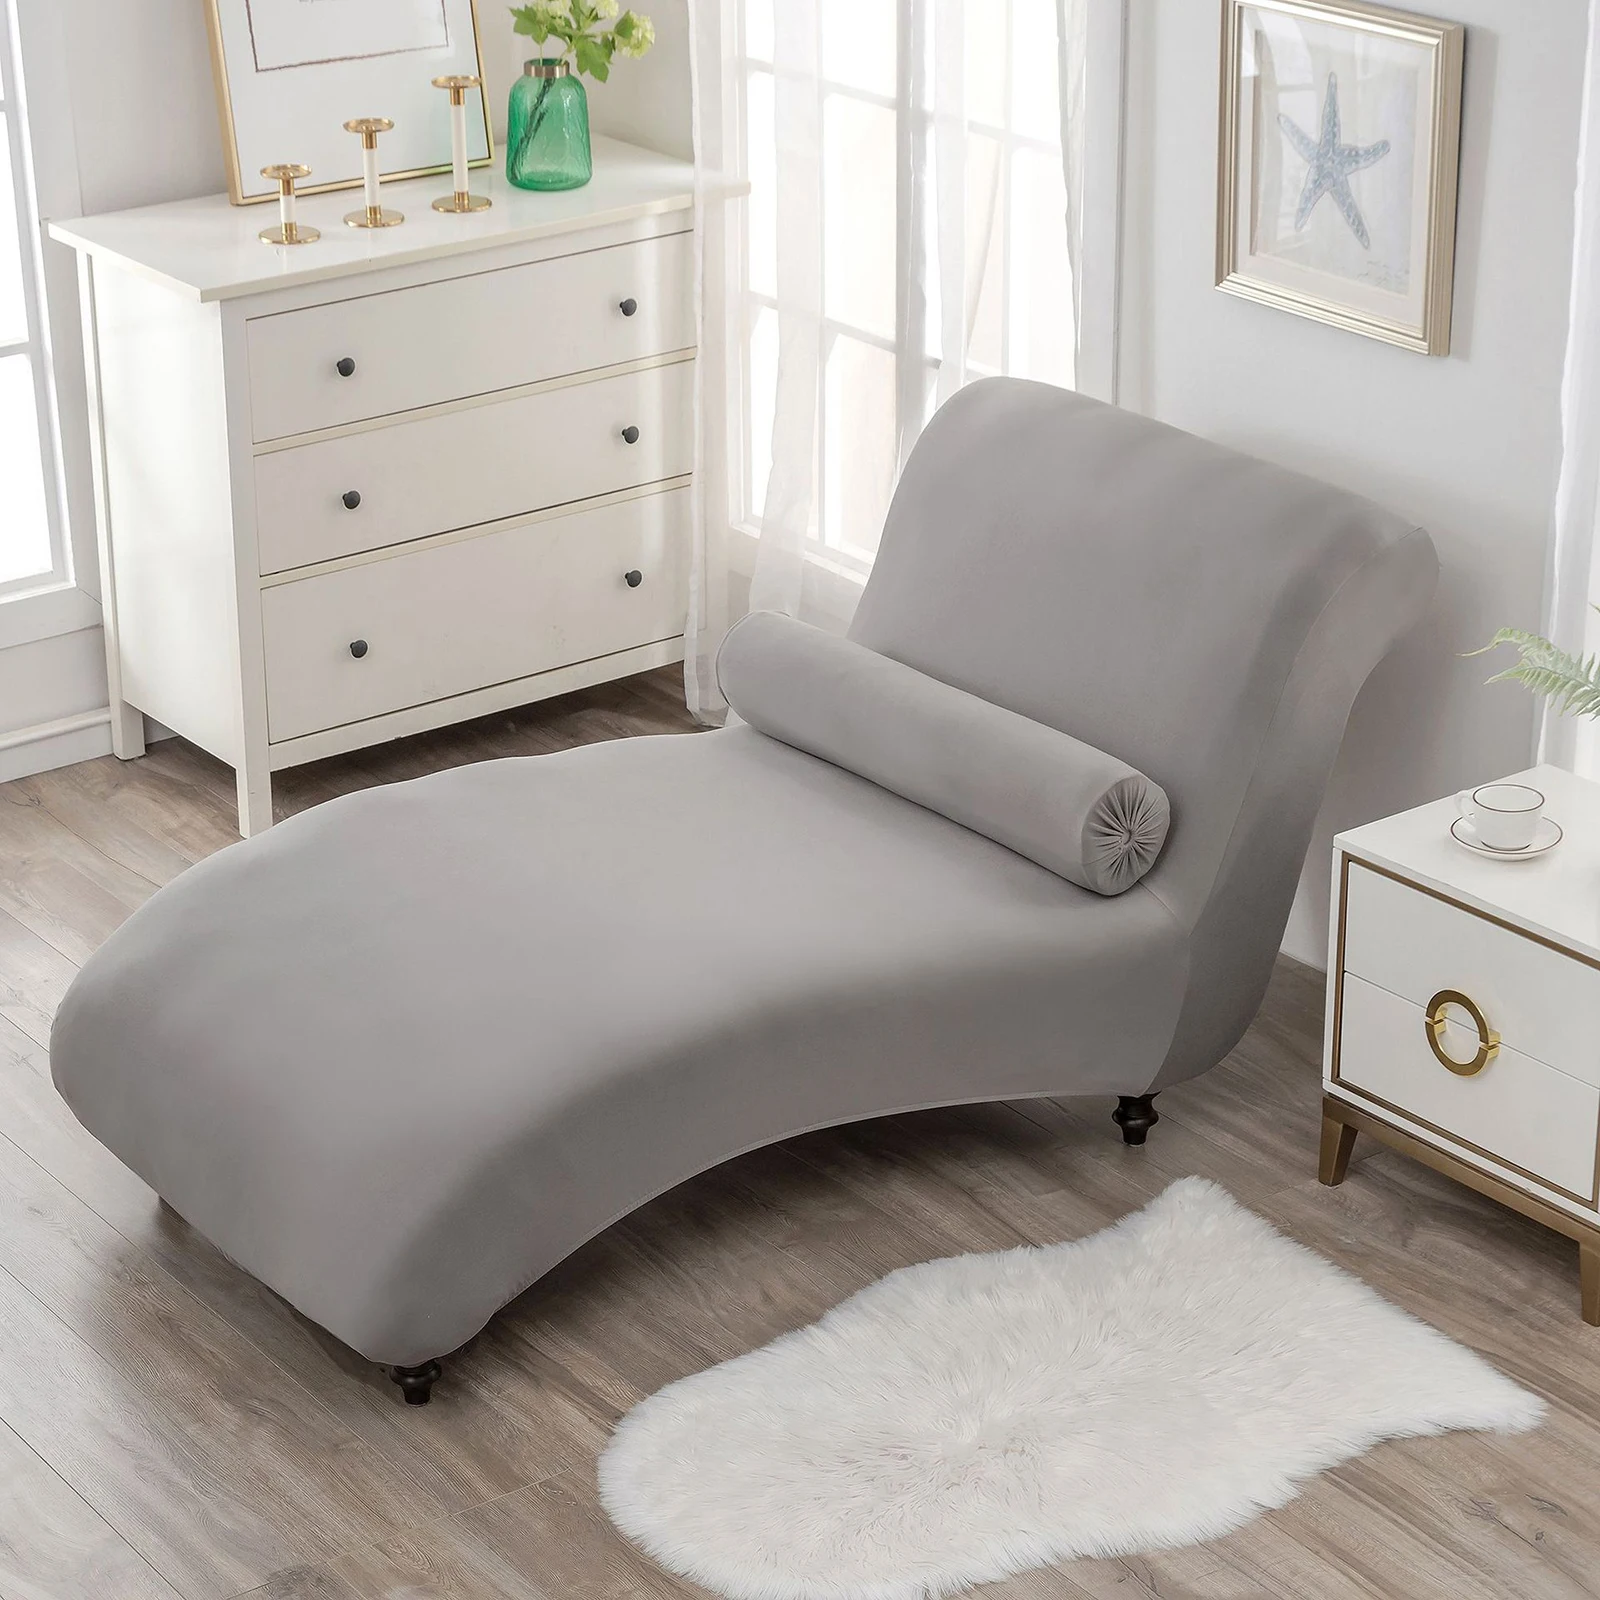 Armless Chaise Lounge Cover Chaise Lounge Slipcover for Bedroom Chaise